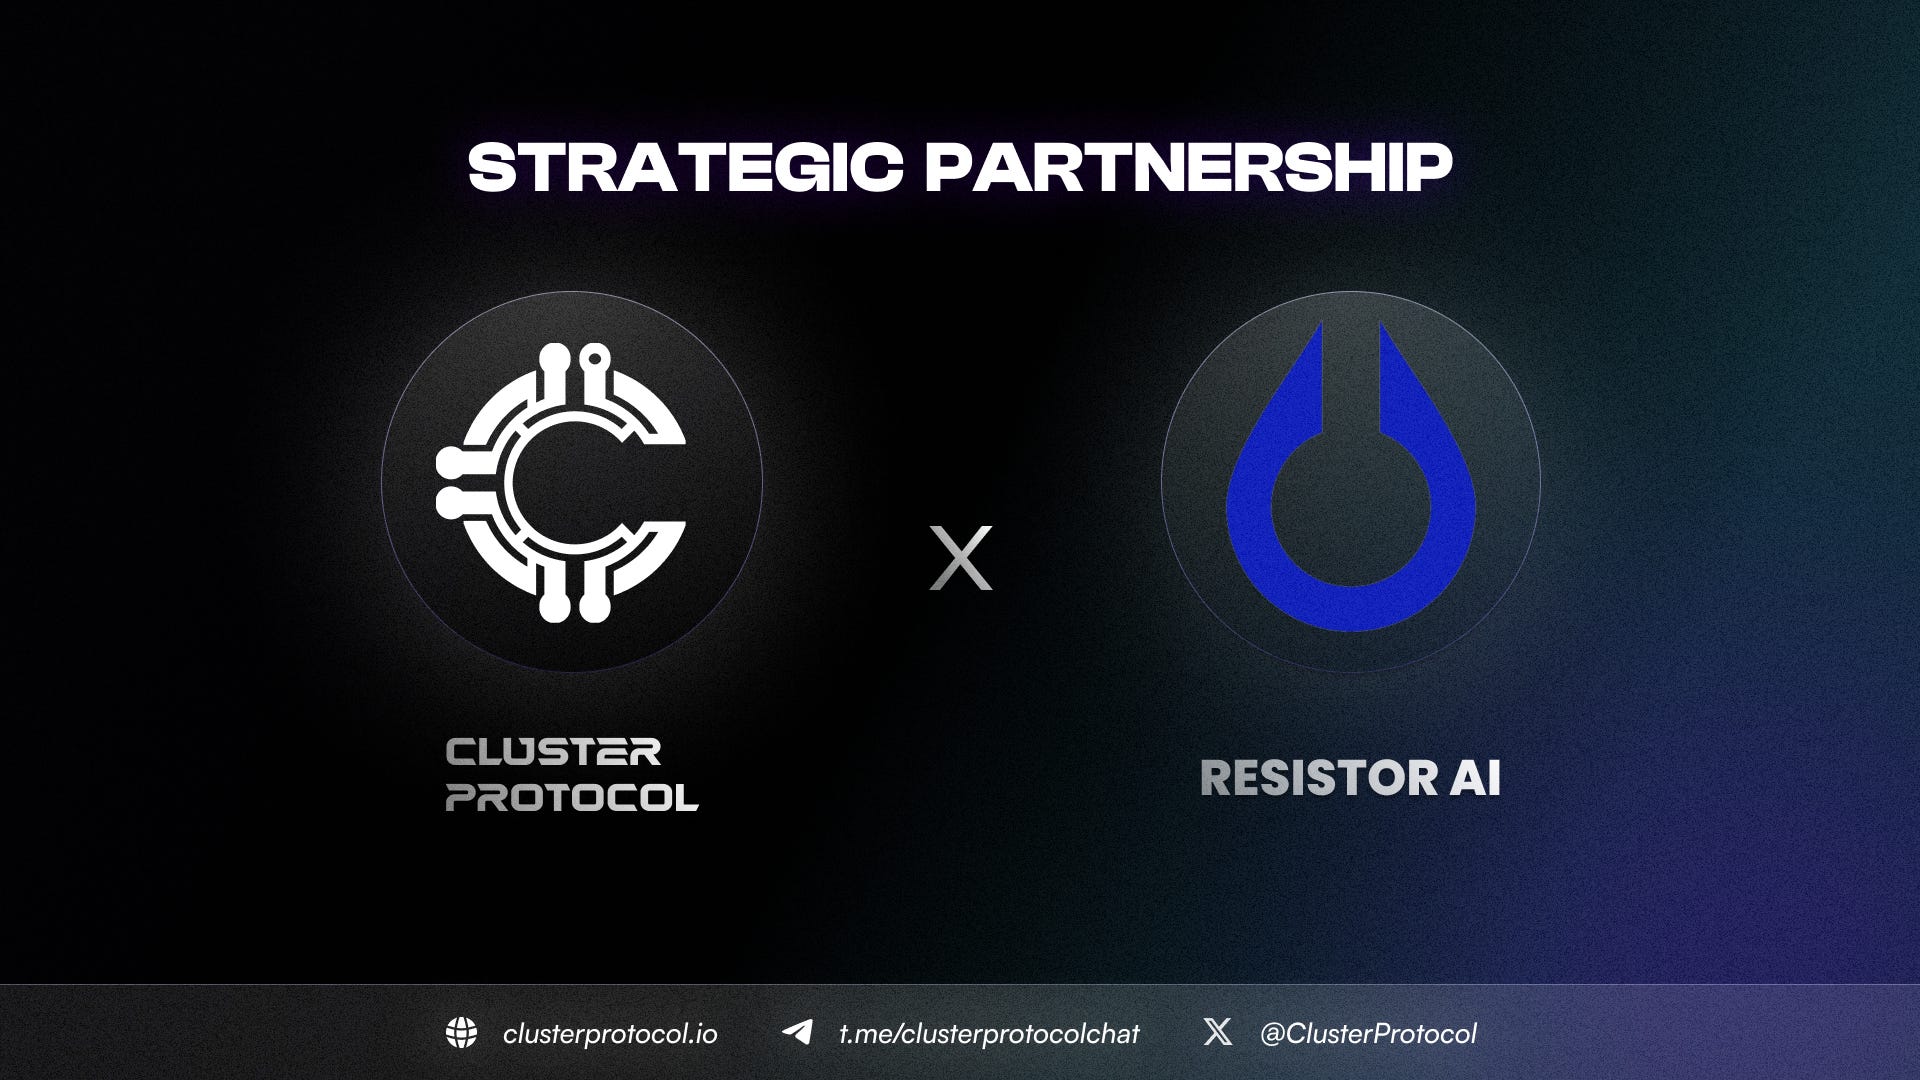  Empowering AI Innovation: The Resistor AI and Cluster Protocol Partnership